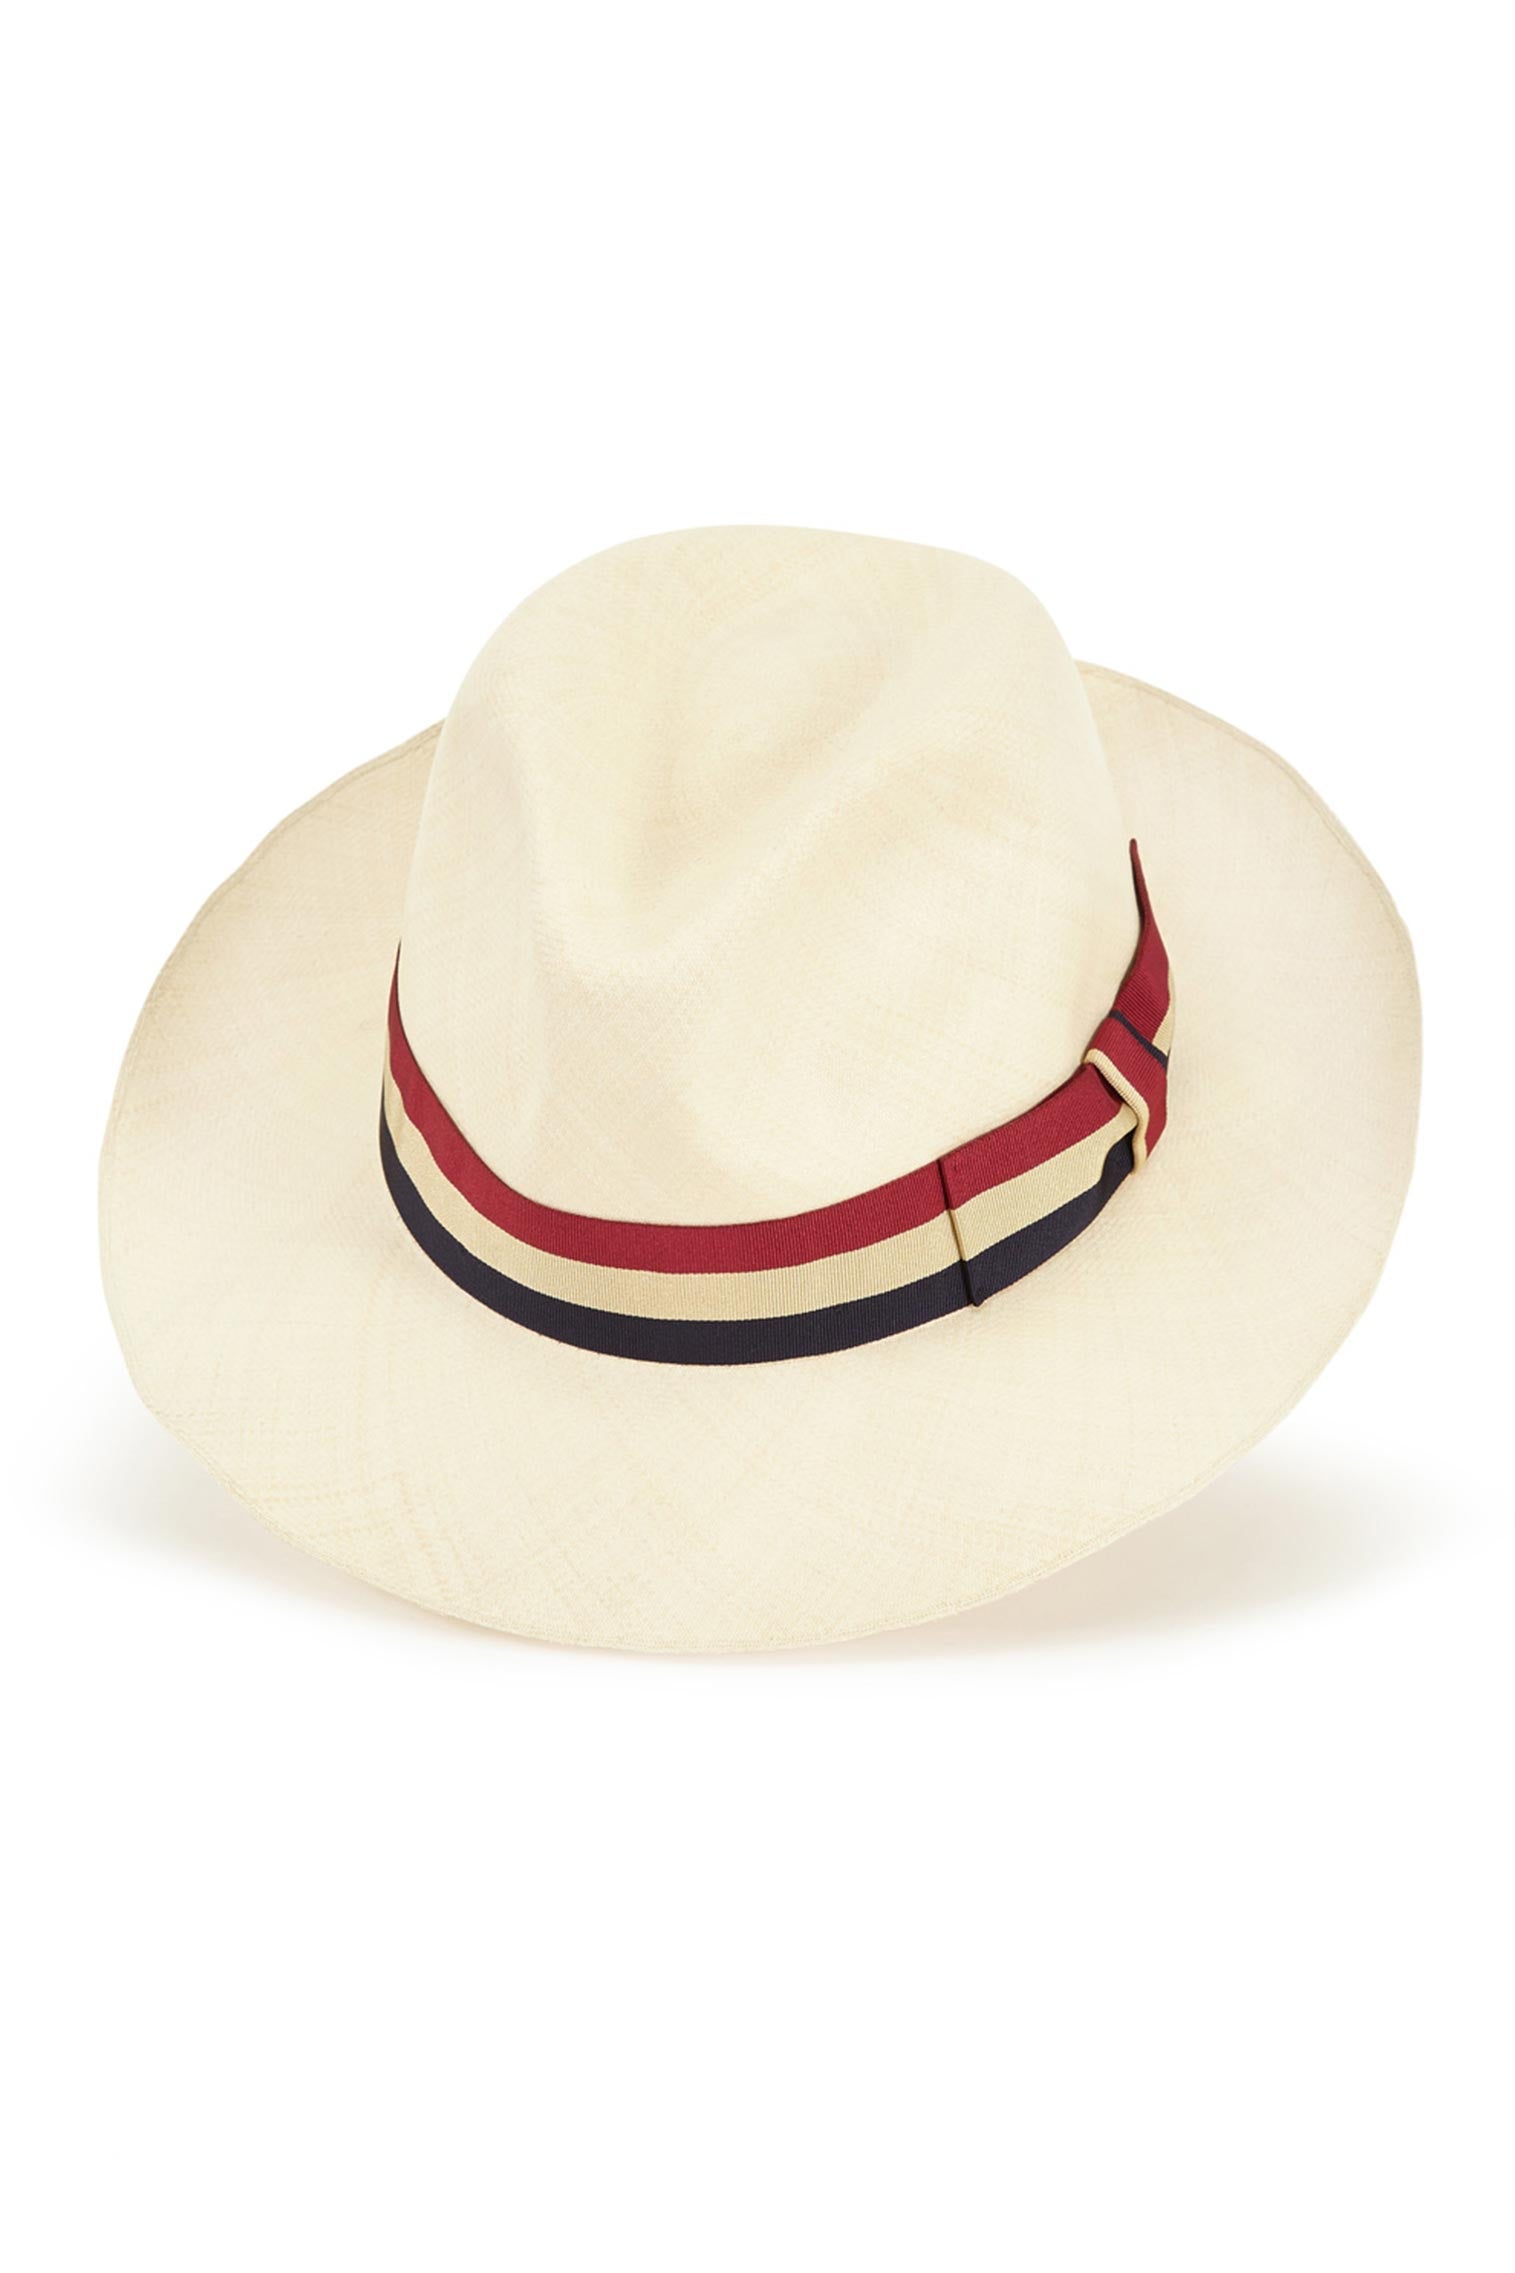 Lock & Co. Summer 2023 Selection of Sun Hats for Men